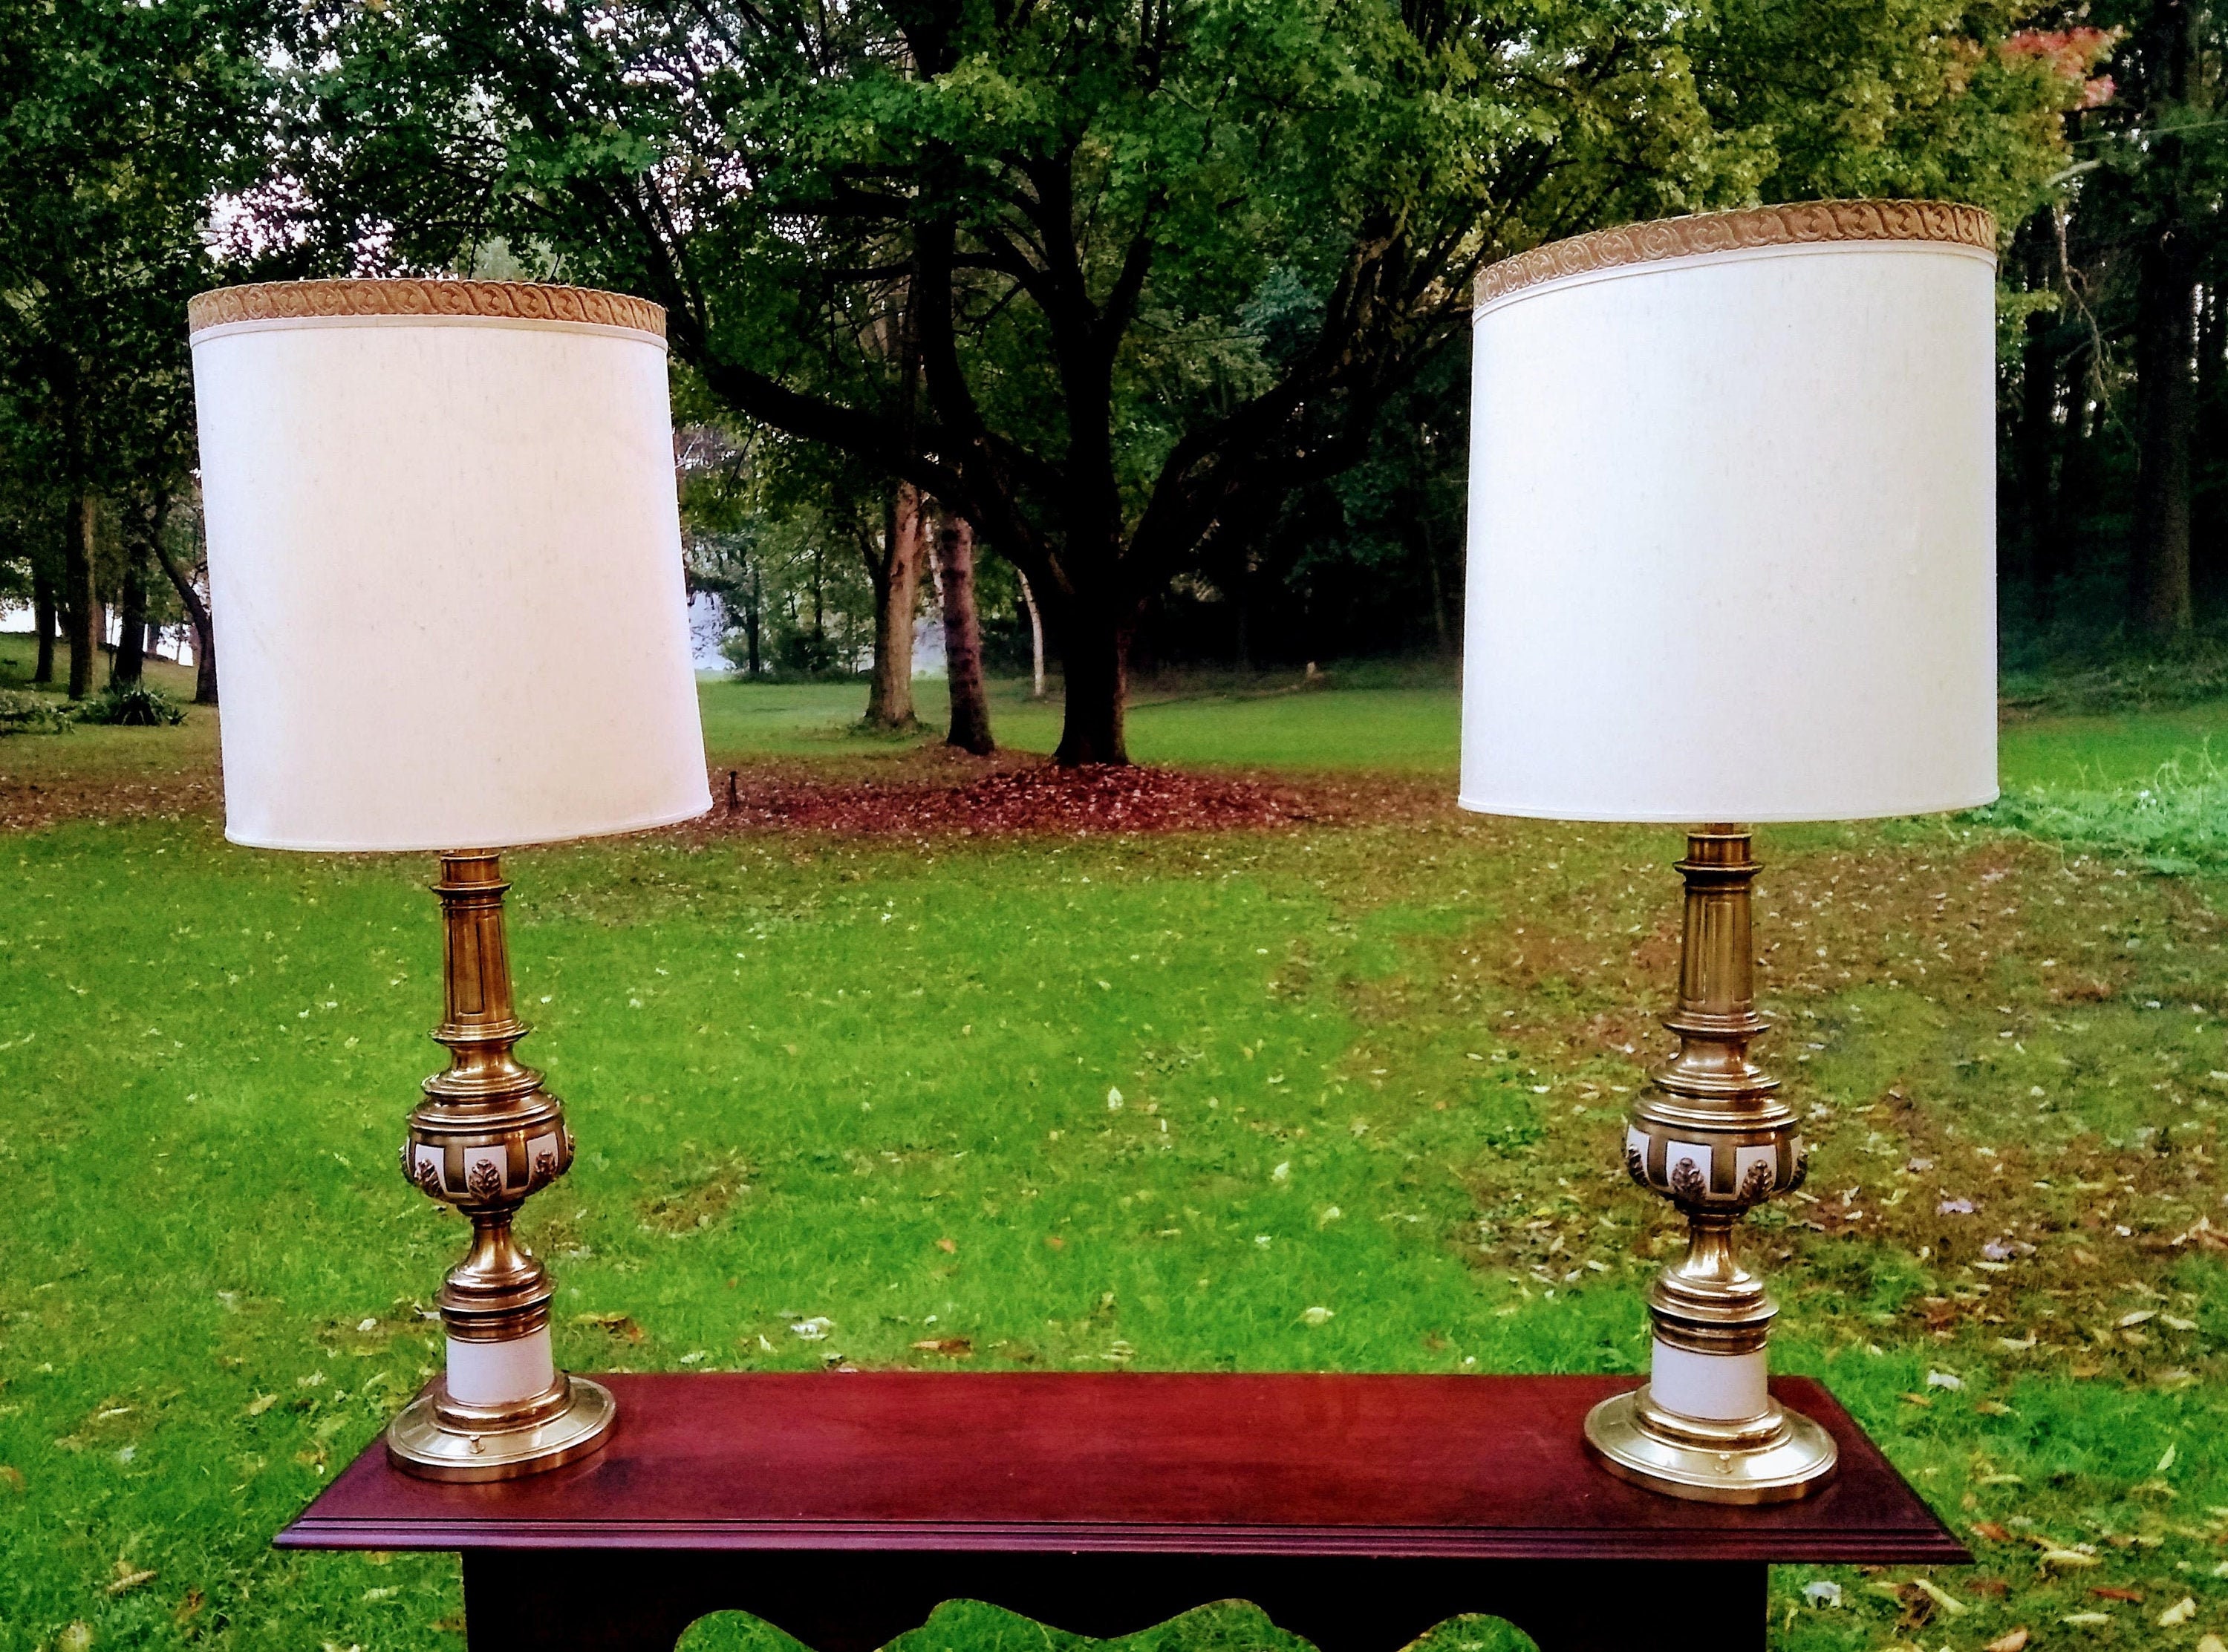 1960's Hollywood Regency Solid Brass Table Lamp, Mid Century